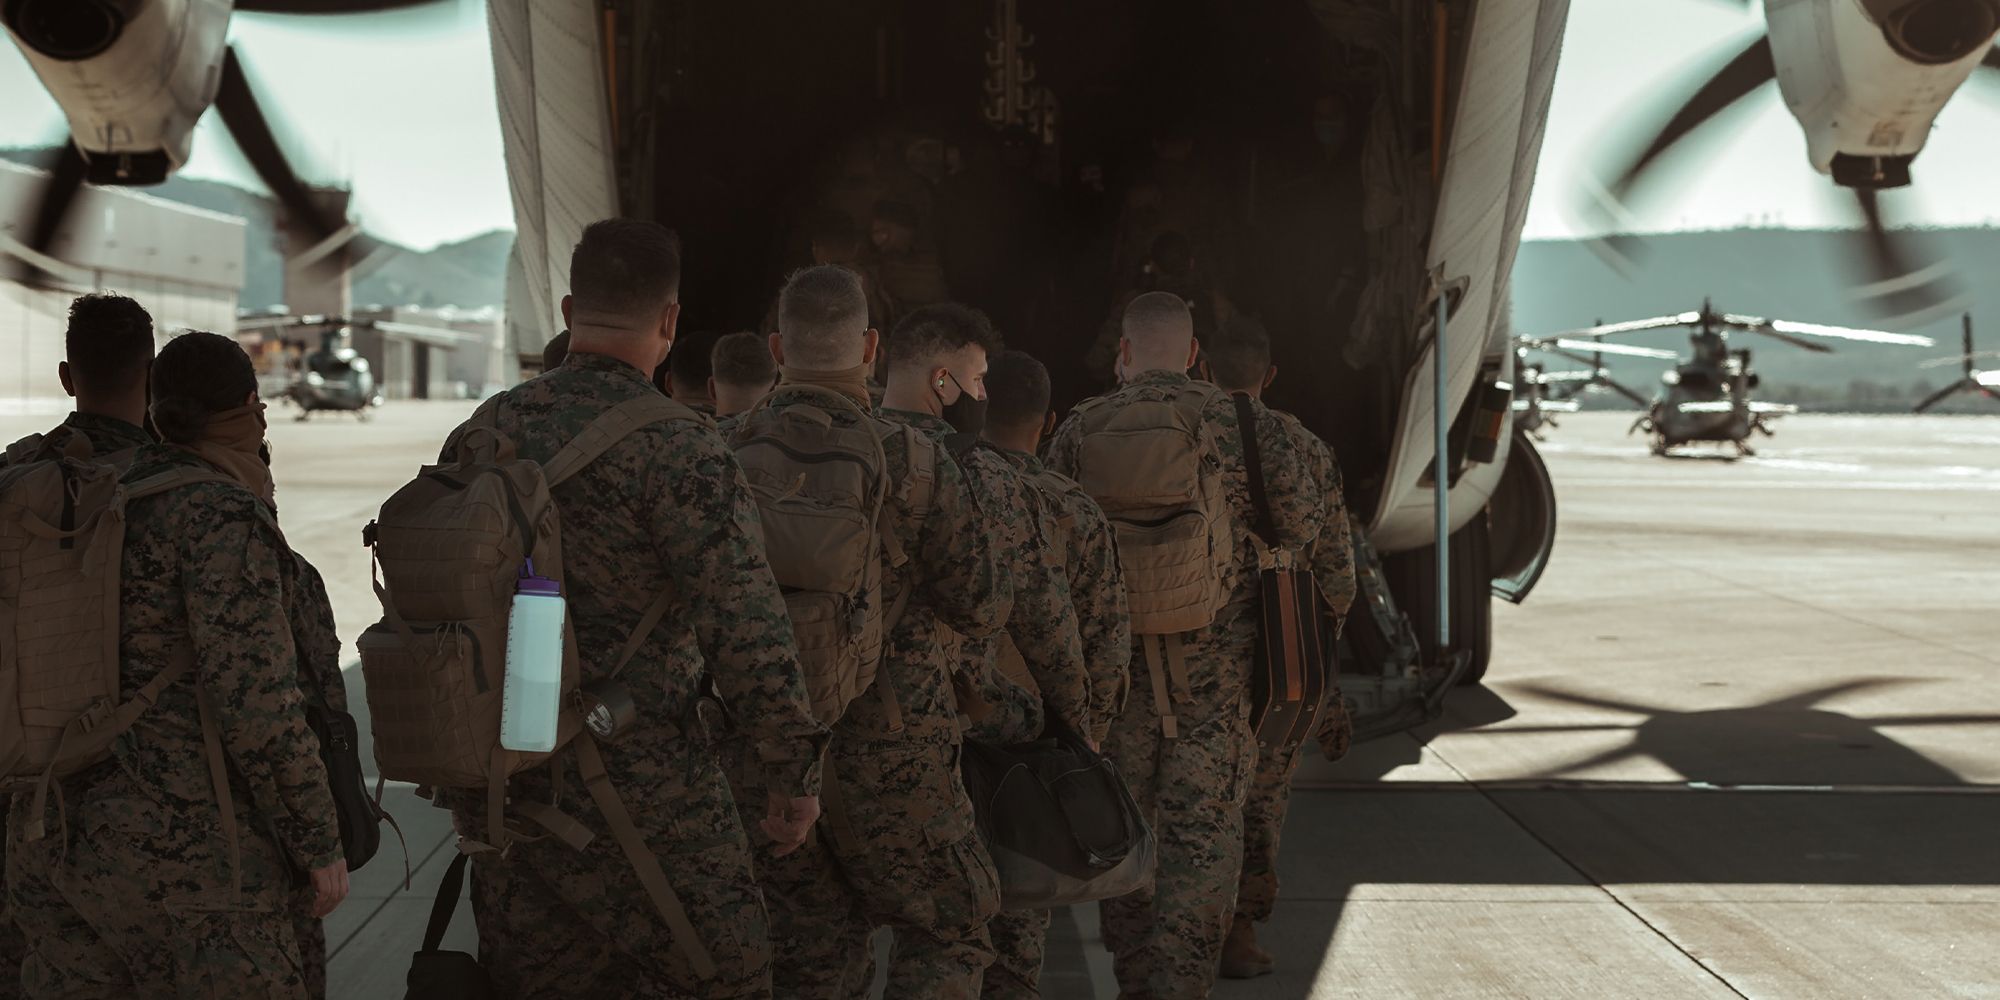 Image of US military boarding an aircraft